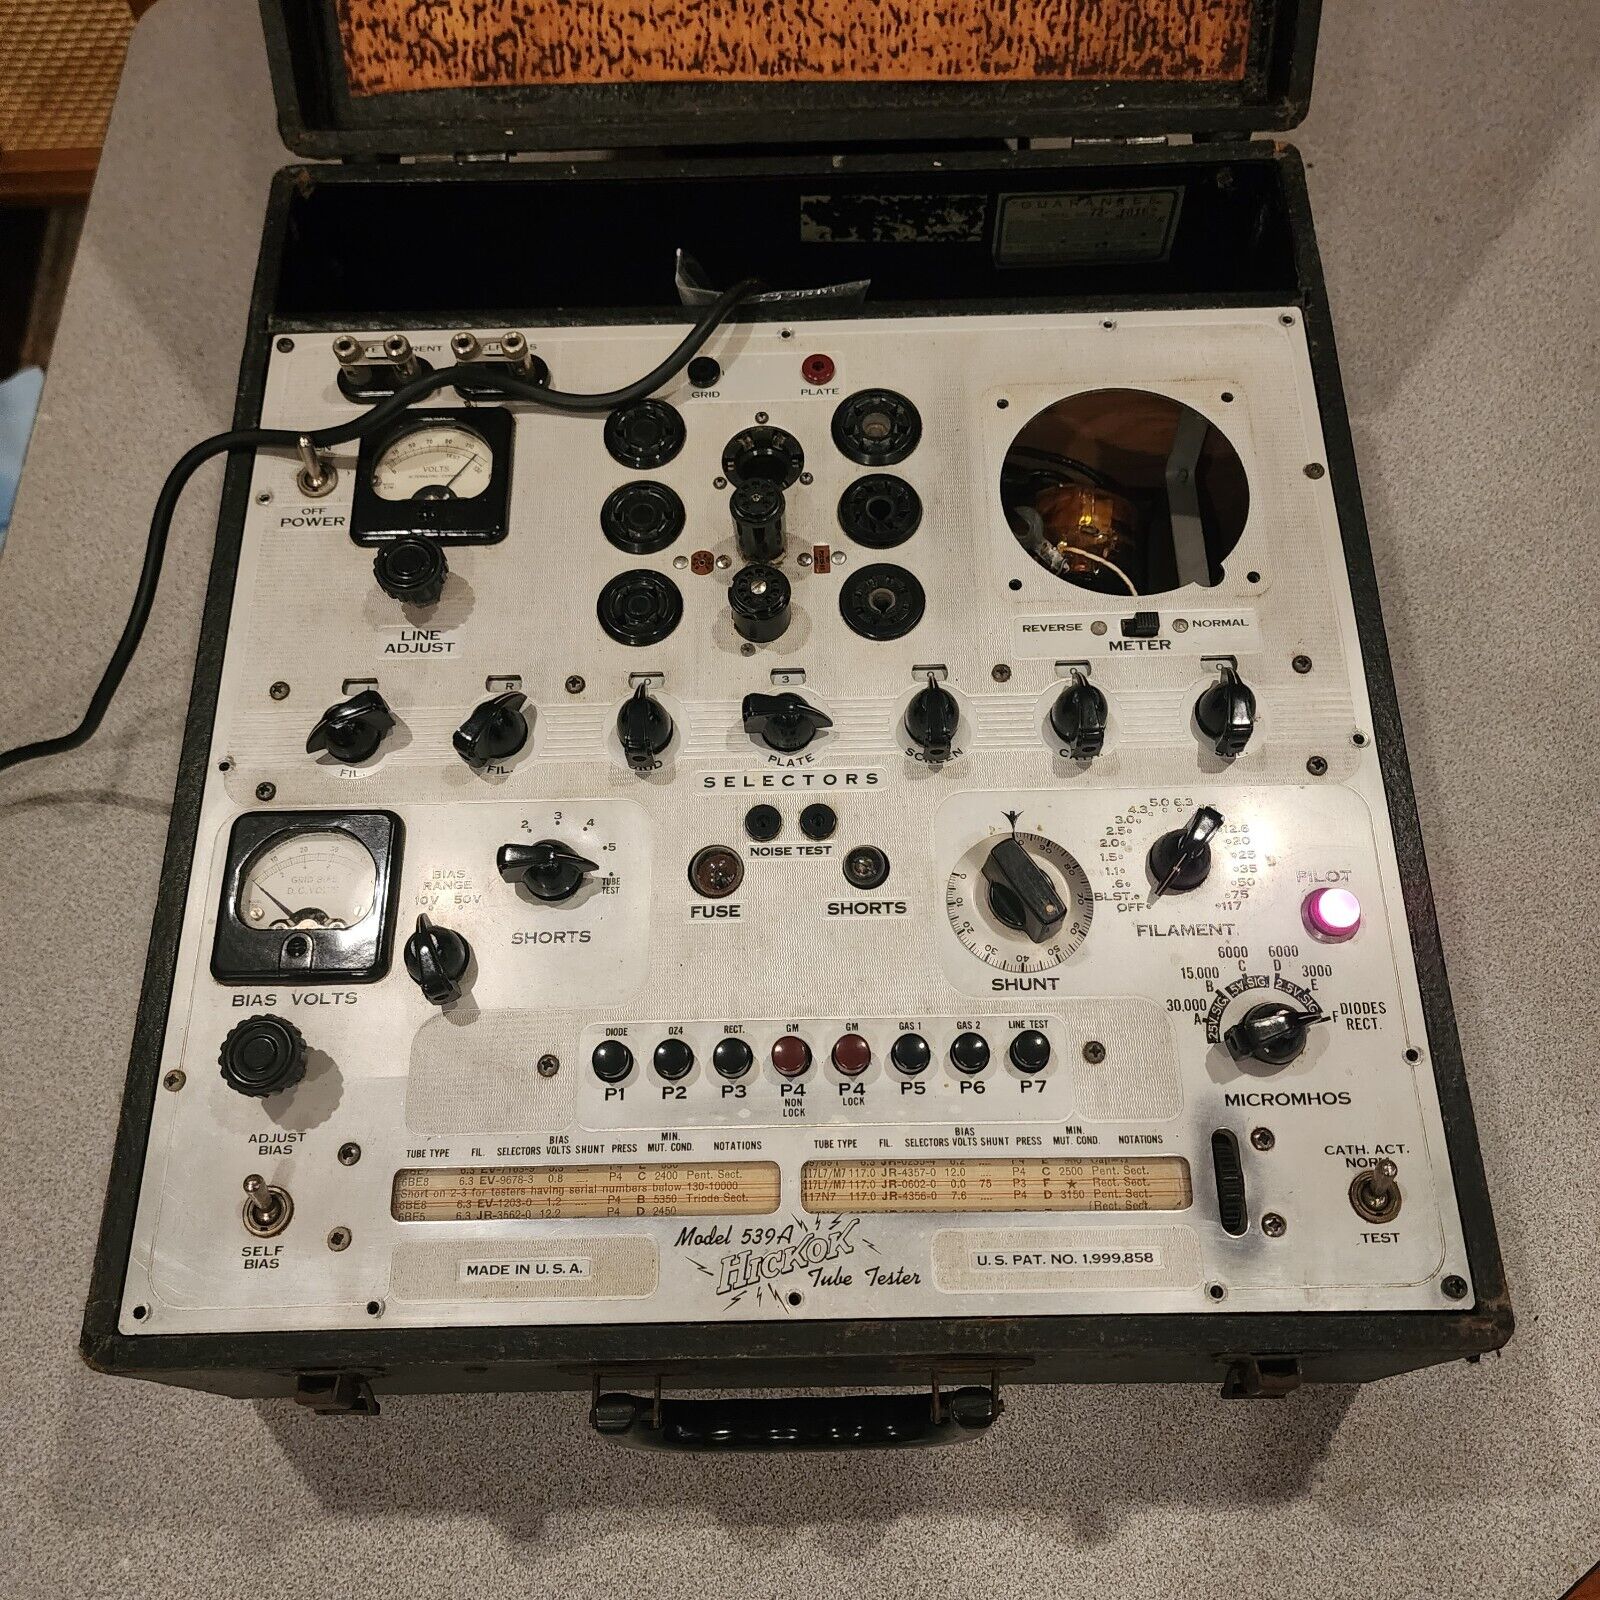 Hickok Model 539A Dynamic Mutual Conductance Tube Tester